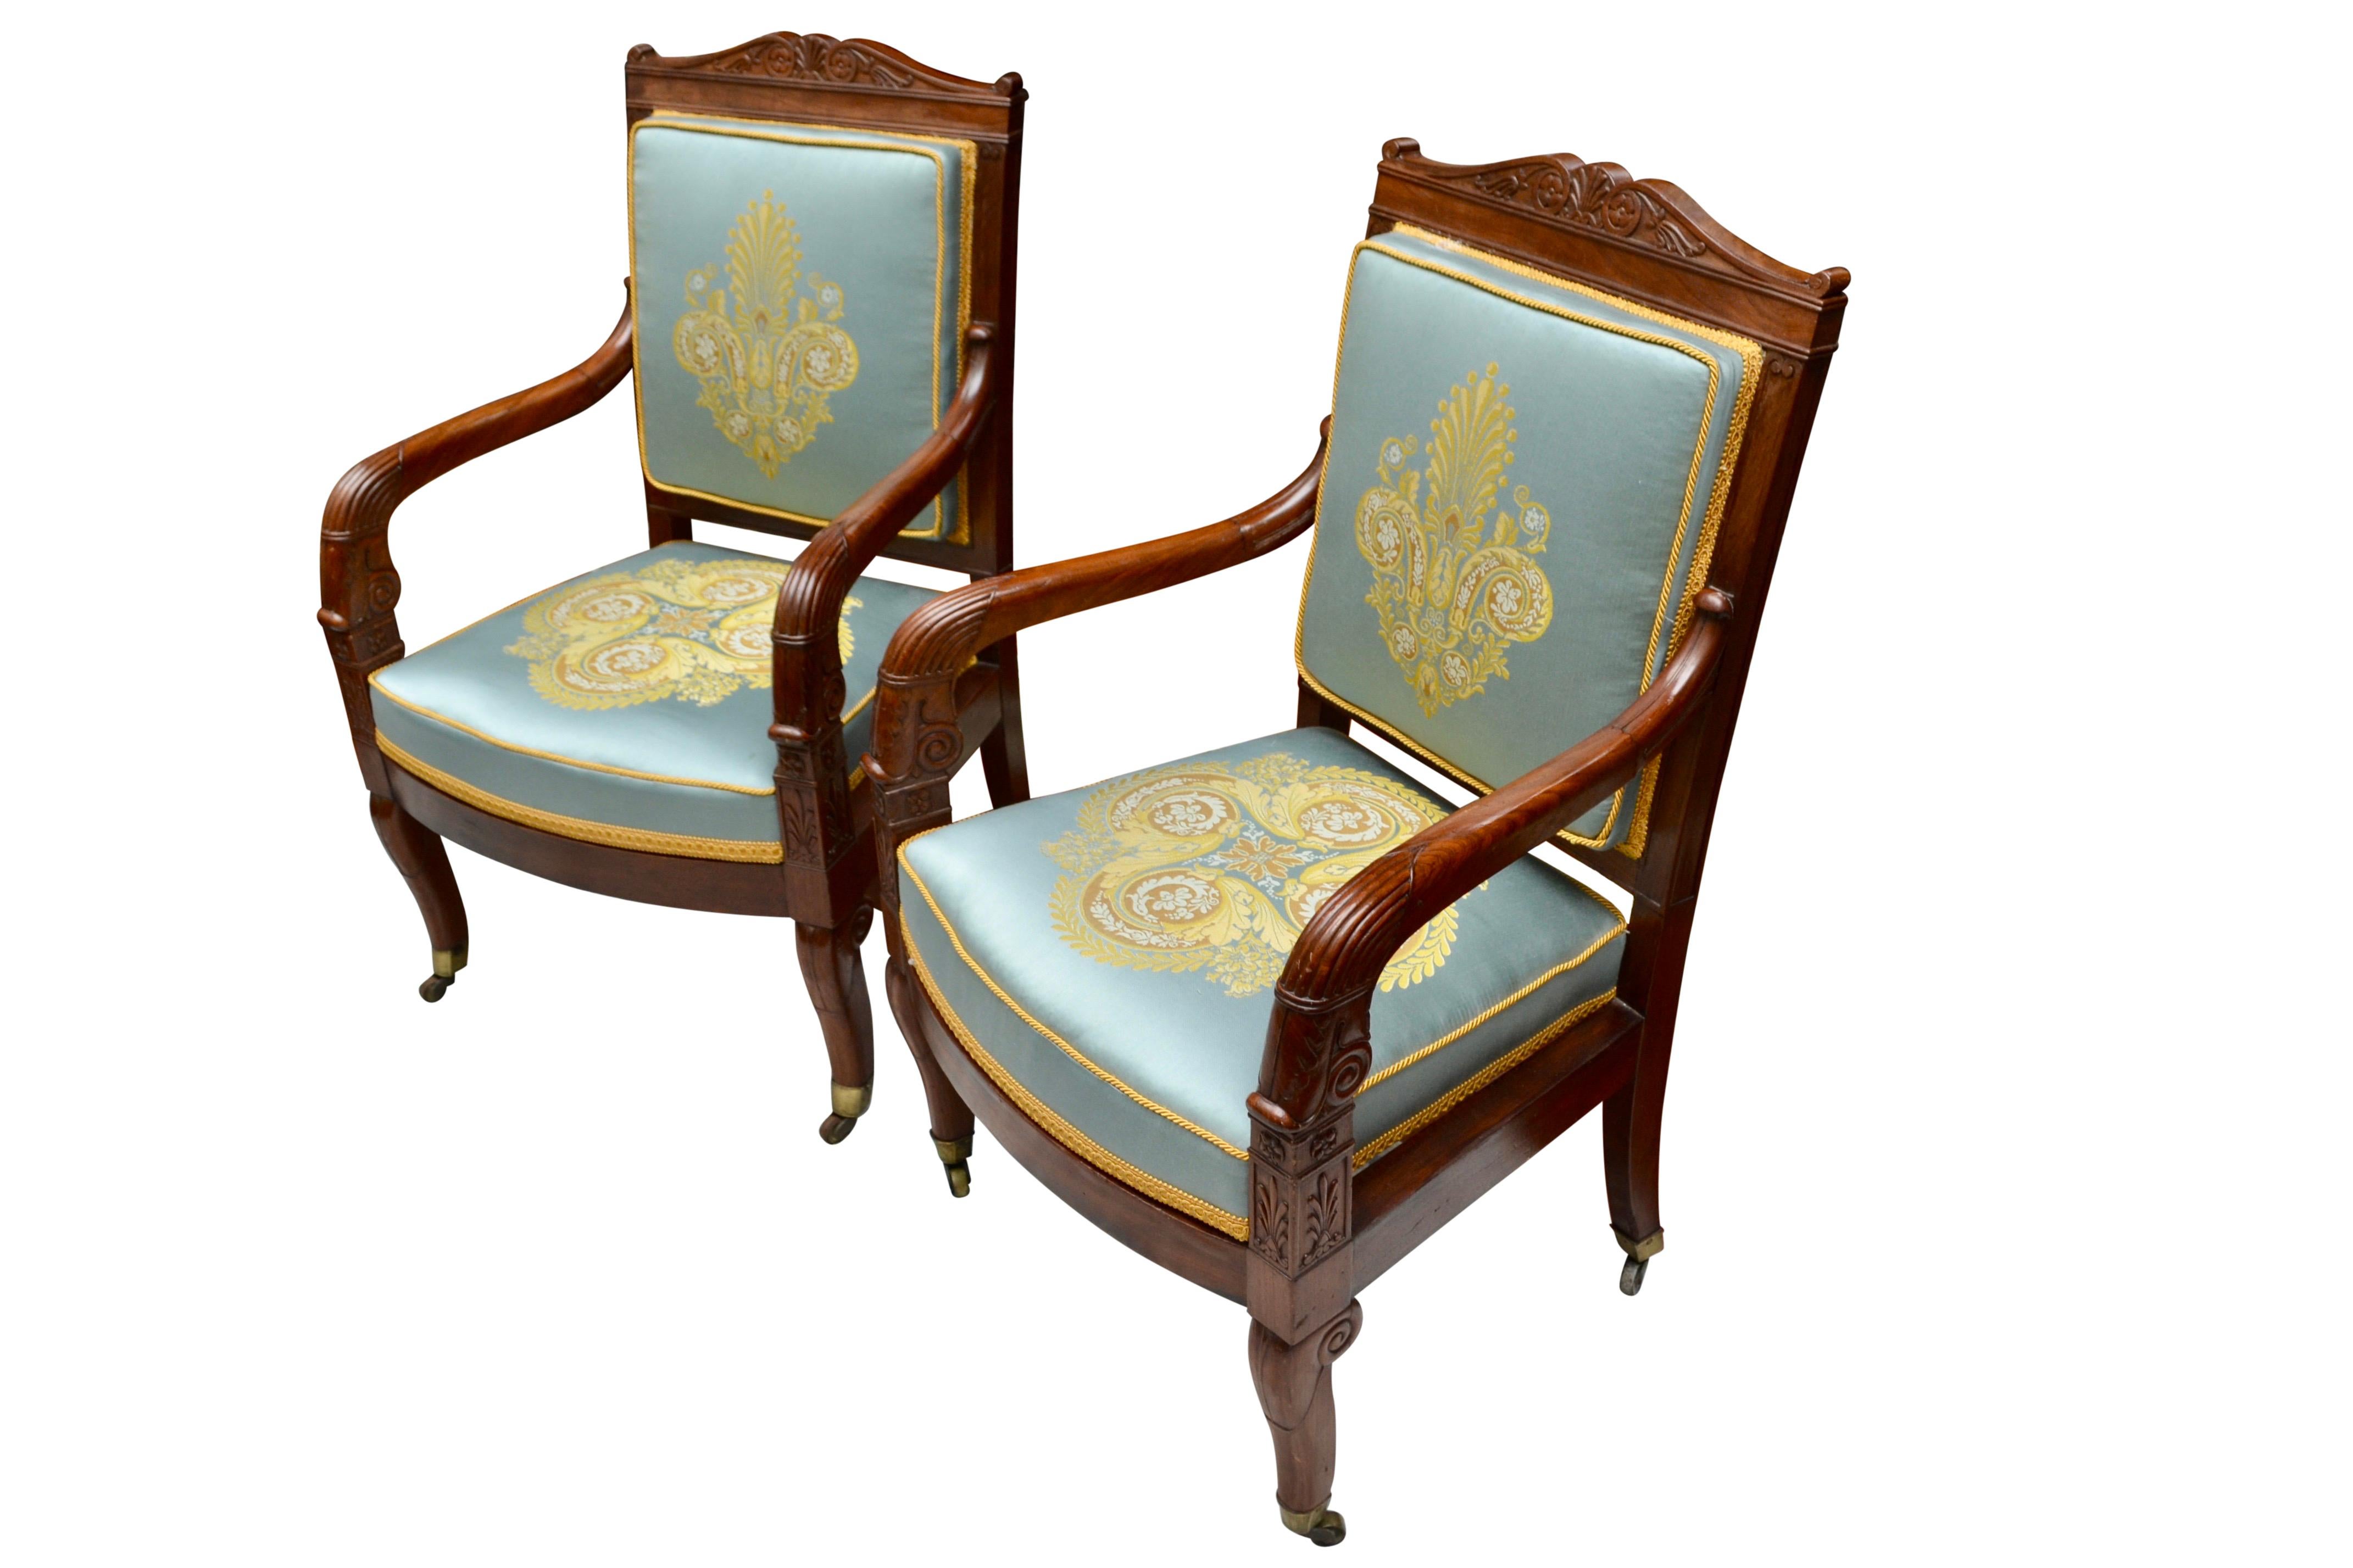 A classic pair of French Empire period open armchairs in well figured and carved mahogany; each with a square back topped by a bow shaped carved frieze featuring folliate rosettes and downscrolled arms. Where the arms join the chair rail there are